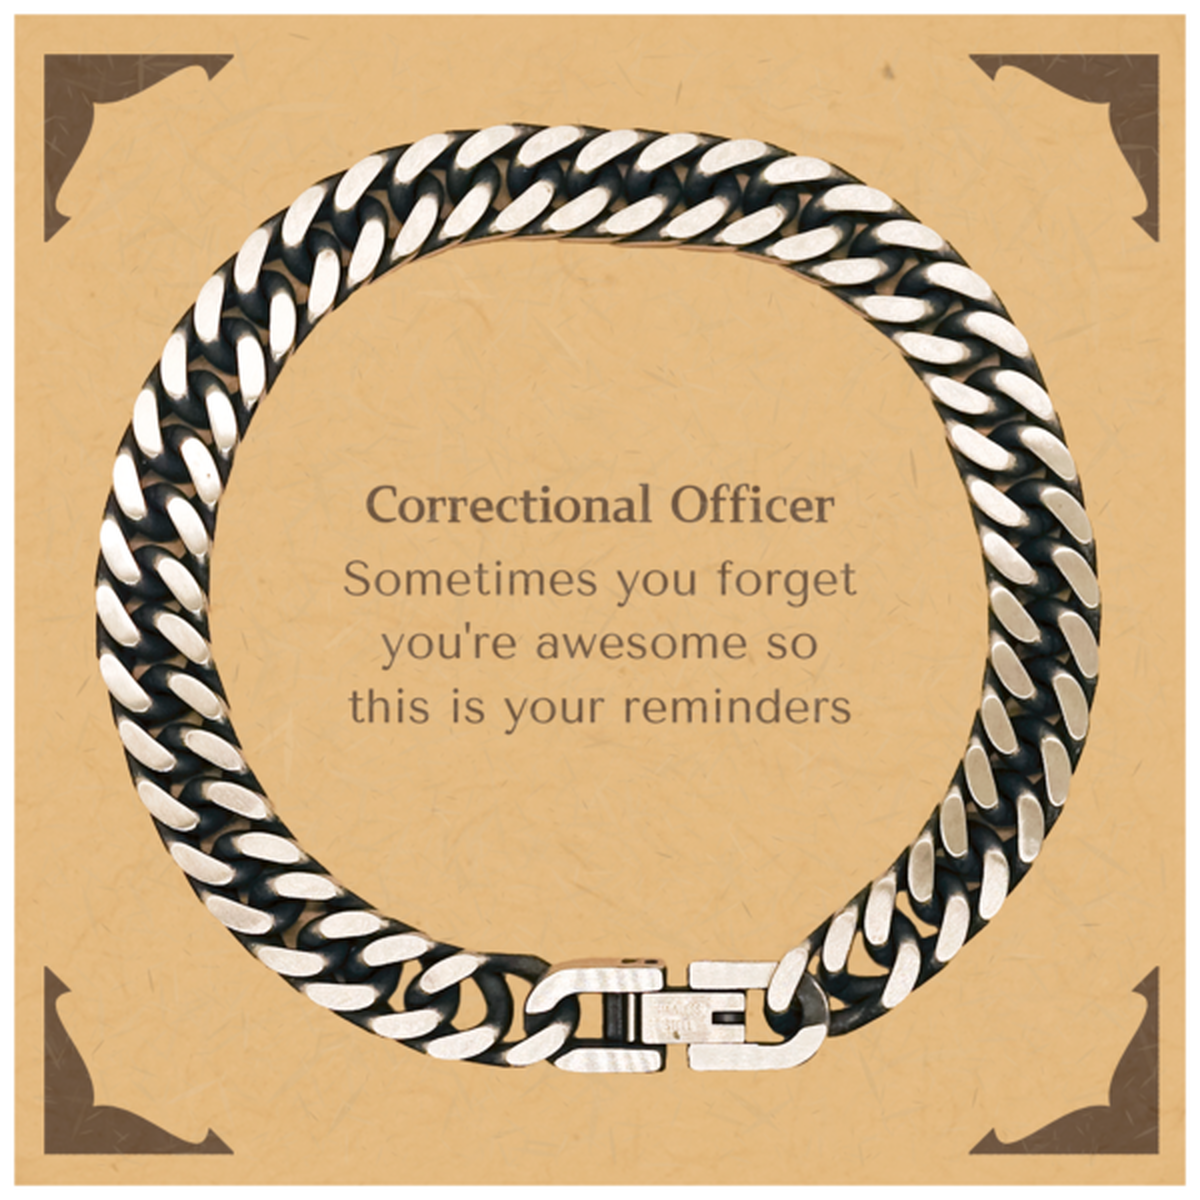 Sentimental Correctional Officer Cuban Link Chain Bracelet, Correctional Officer Sometimes you forget you're awesome so this is your reminders, Graduation Christmas Birthday Gifts for Correctional Officer, Men, Women, Coworkers